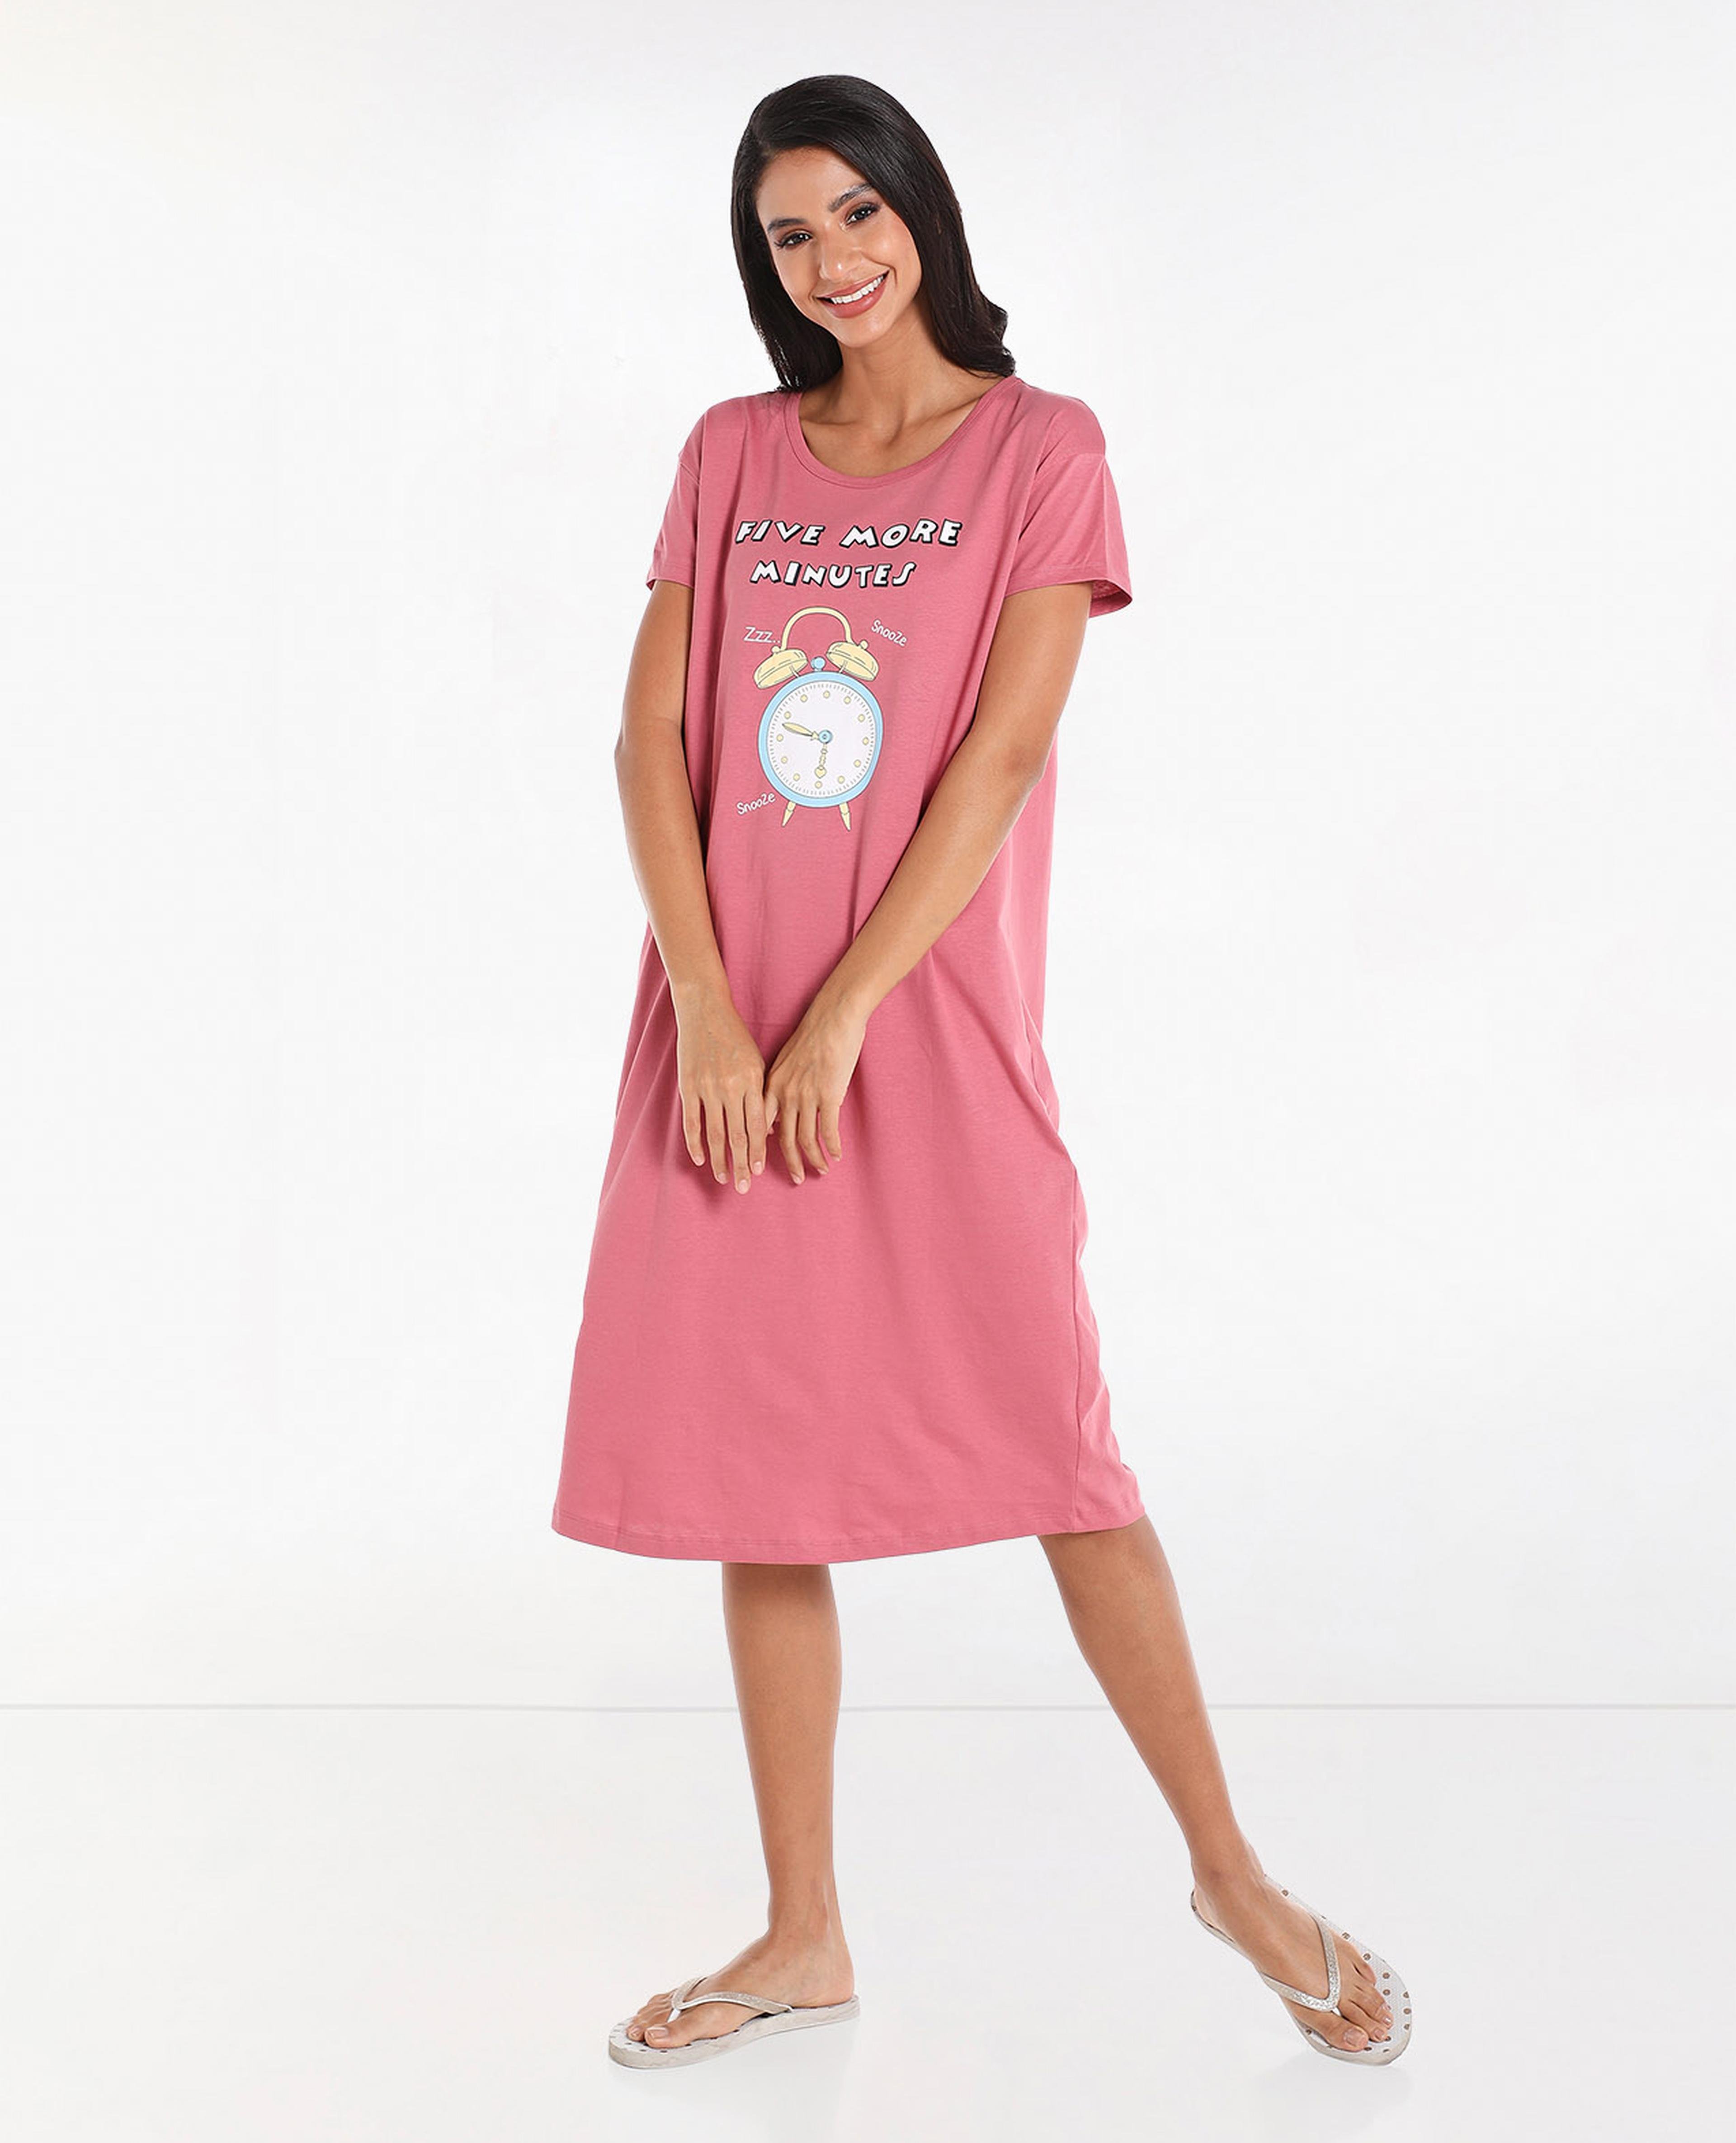 Graphic Printed Sleep T-Shirt with Round Neck and Short Sleeves